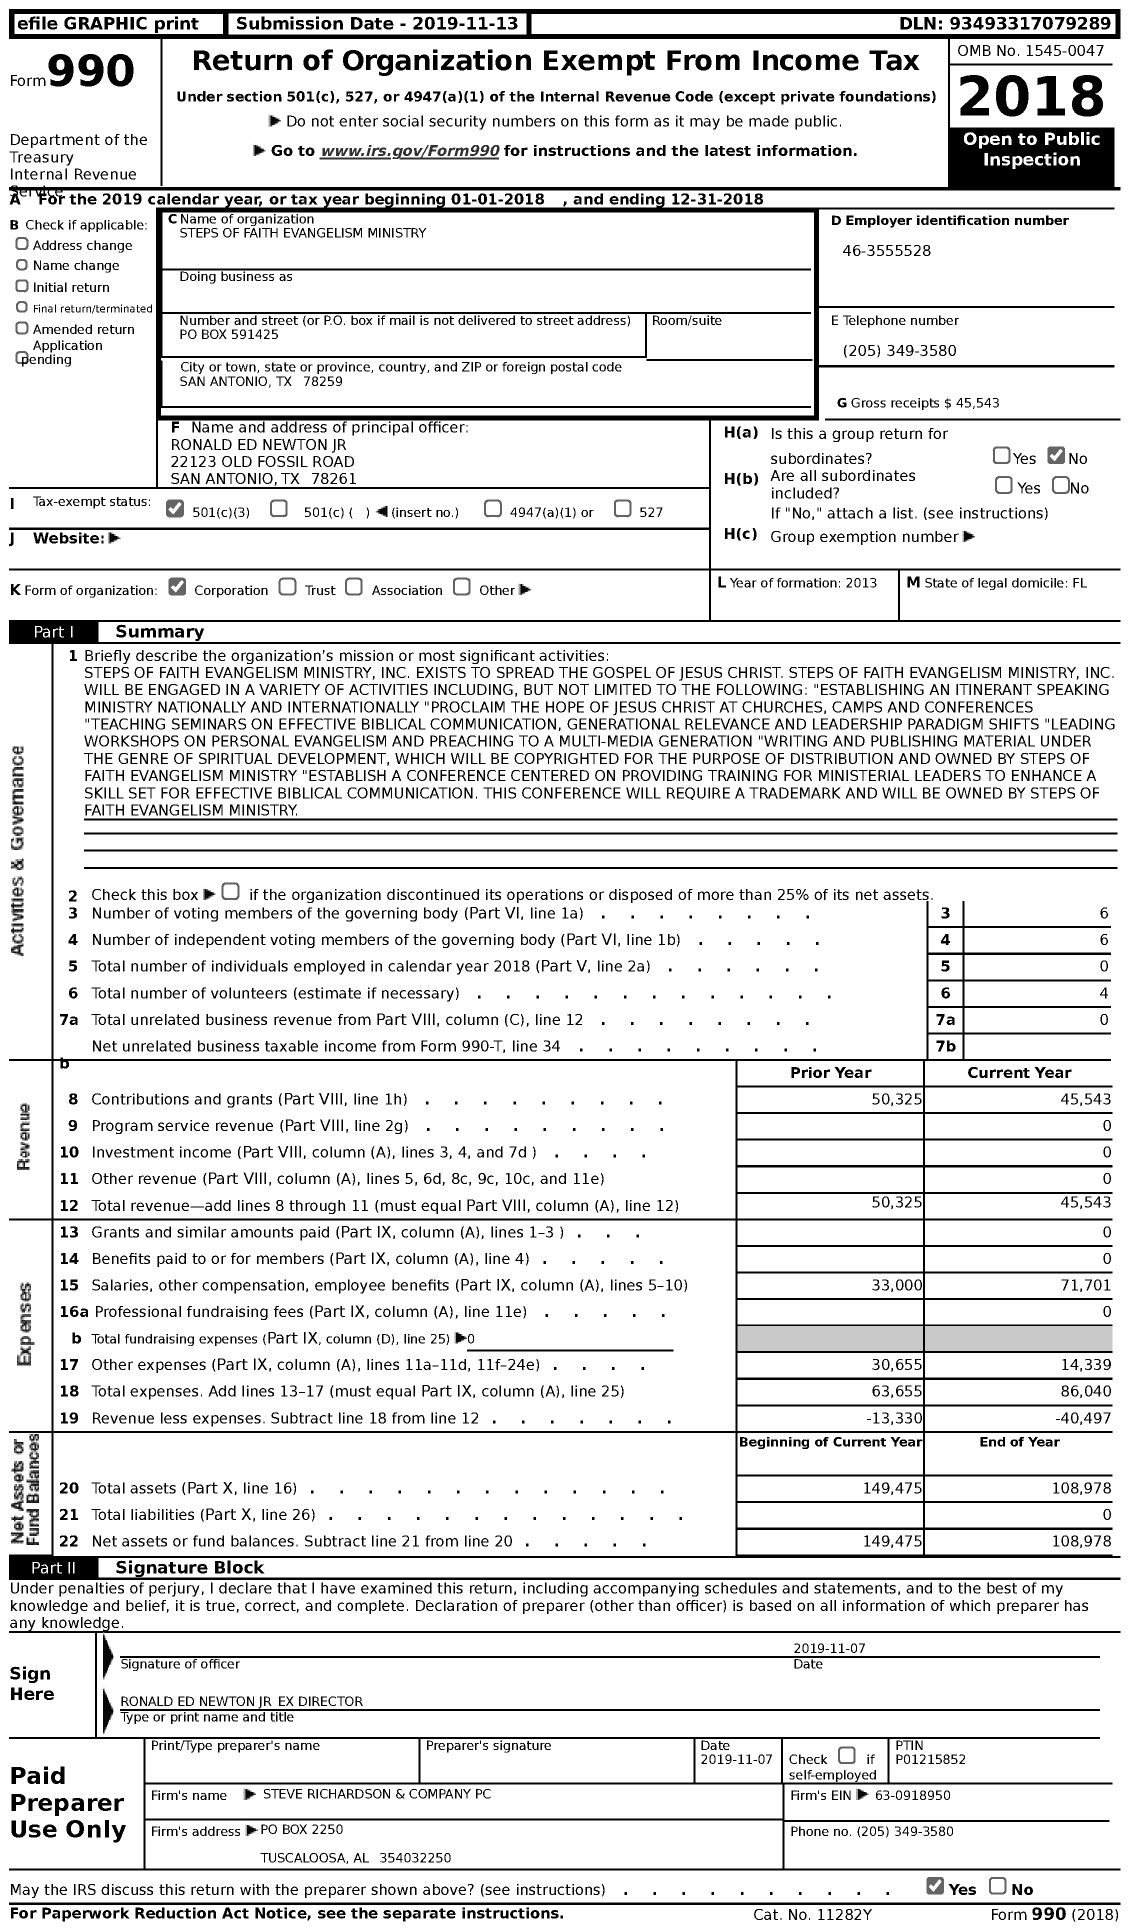 Image of first page of 2018 Form 990 for Ed Newton Ministries